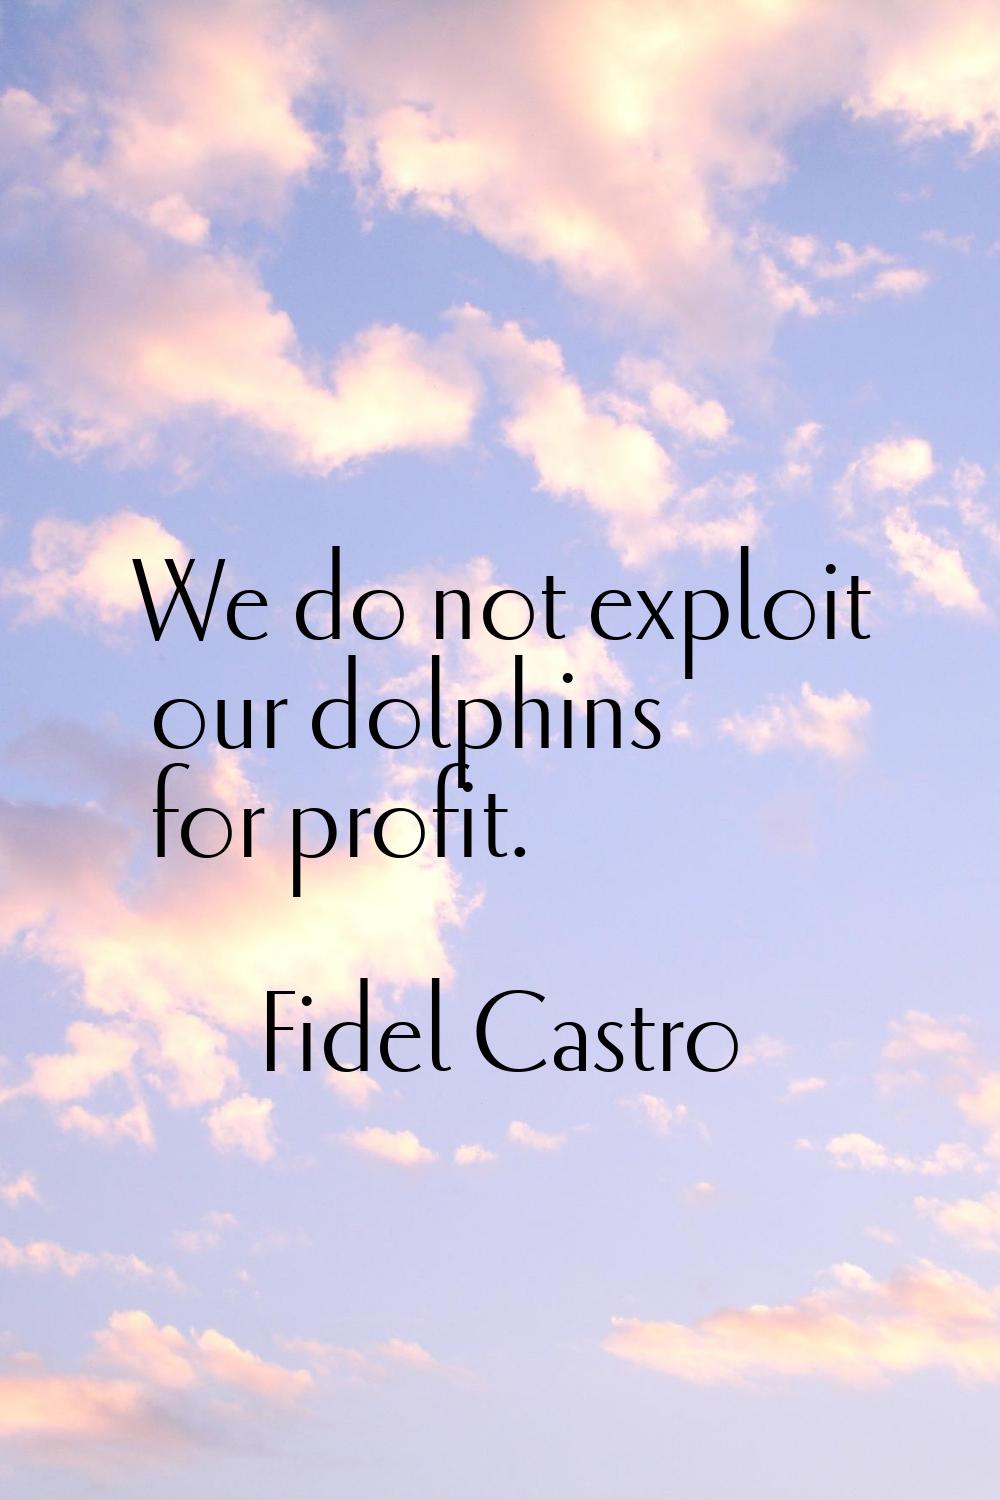 We do not exploit our dolphins for profit.